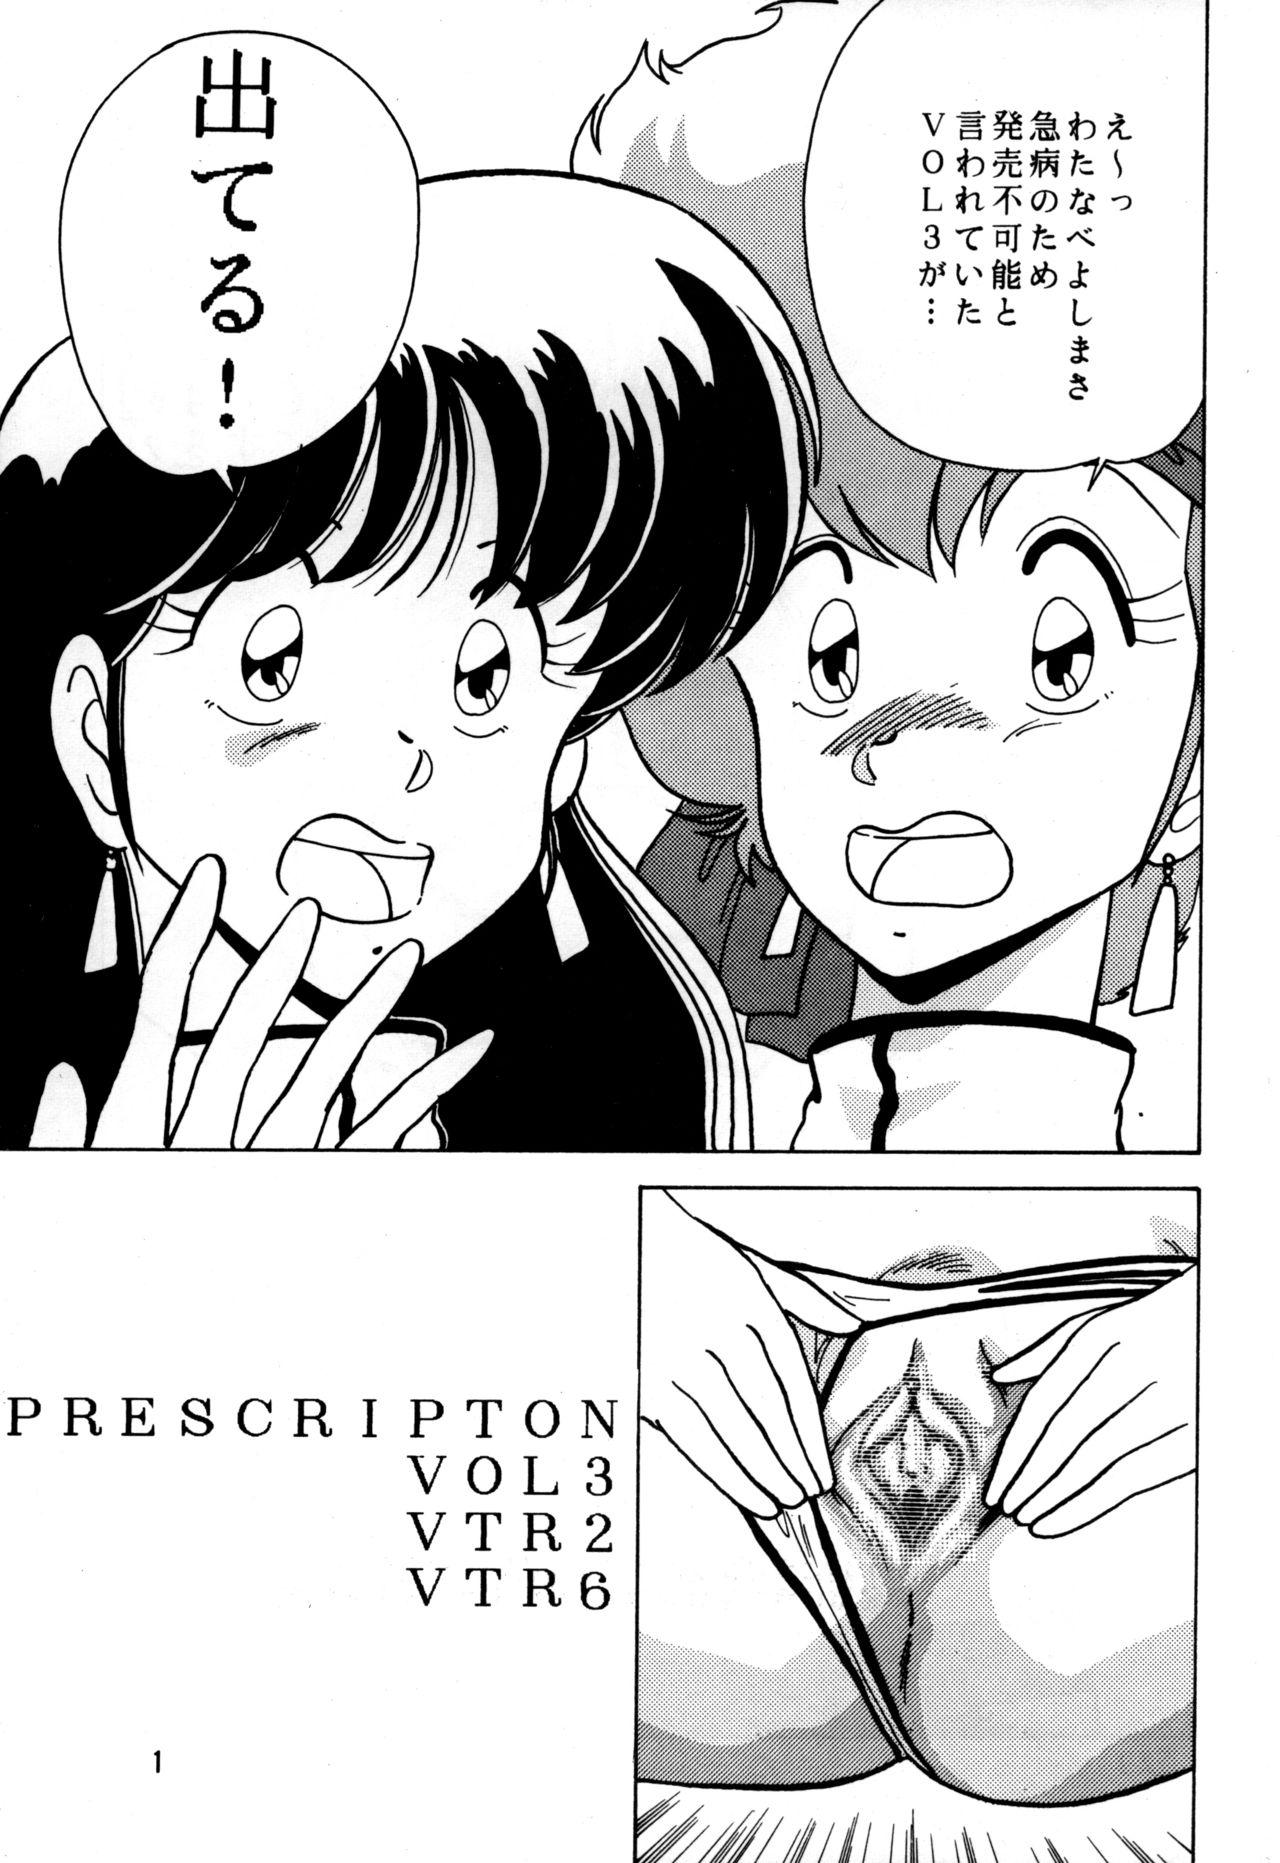 Alone Prescription Vol.3 - Dirty pair Peeing - Page 2